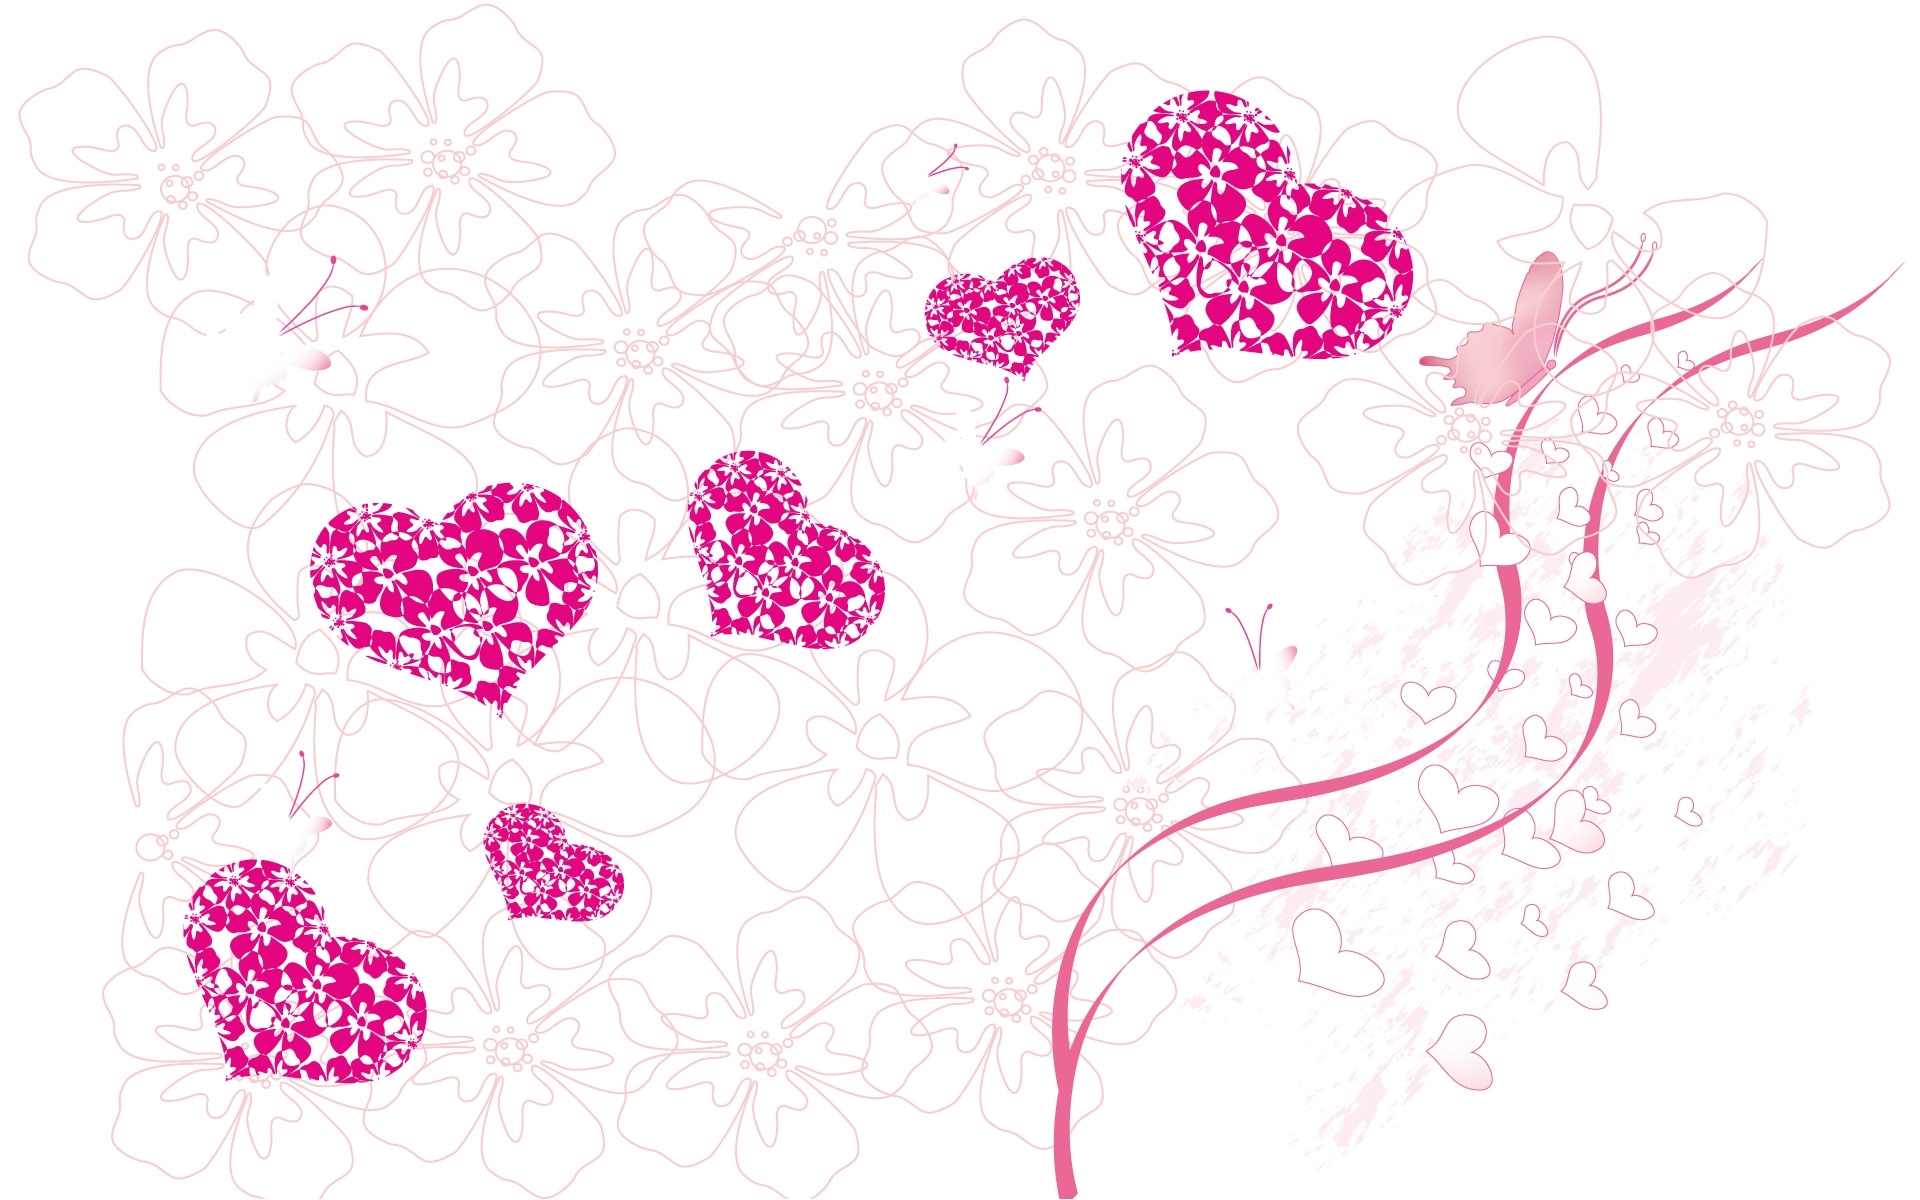 Windows Backgrounds background, hearts, objects, white